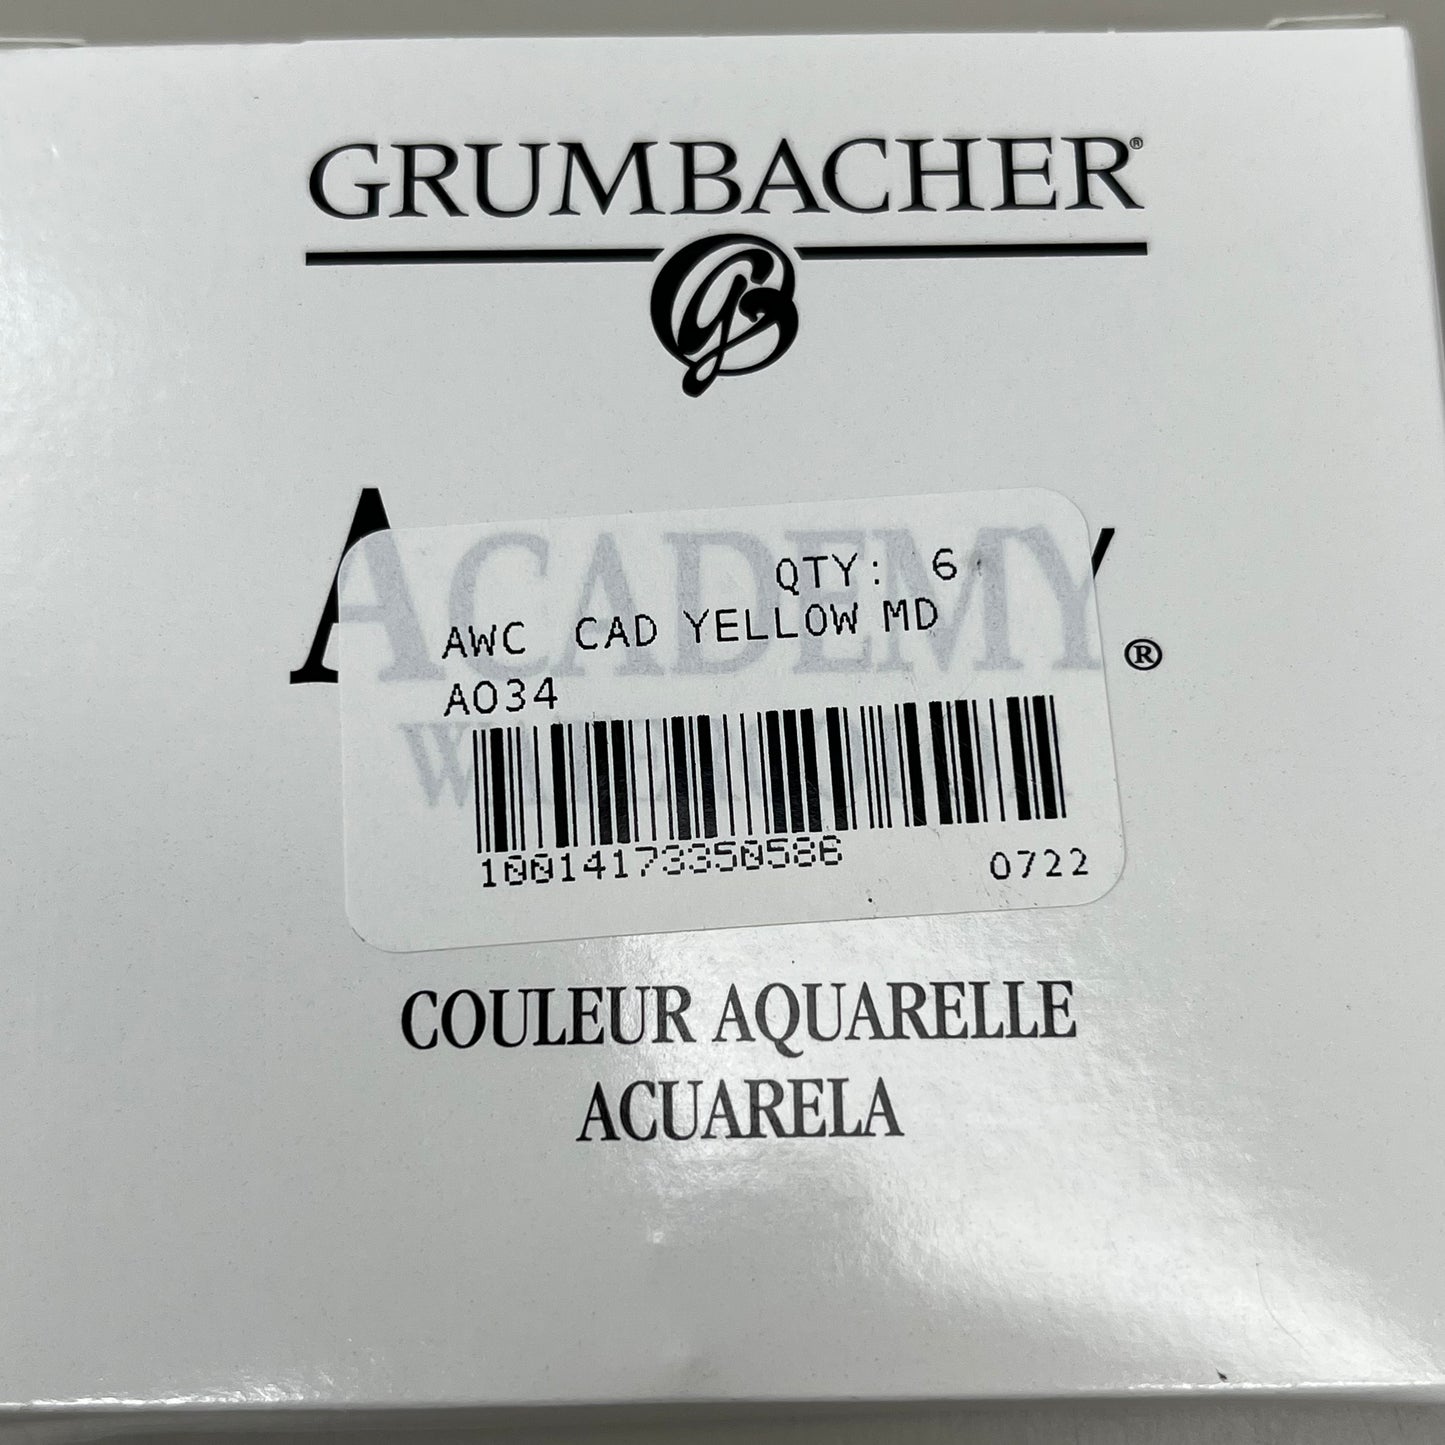 GRUMBACHER 6-PACK! Academy Watercolor Paint Cad Yellow MD .25 fl oz / 7.5 ml A034 (New)